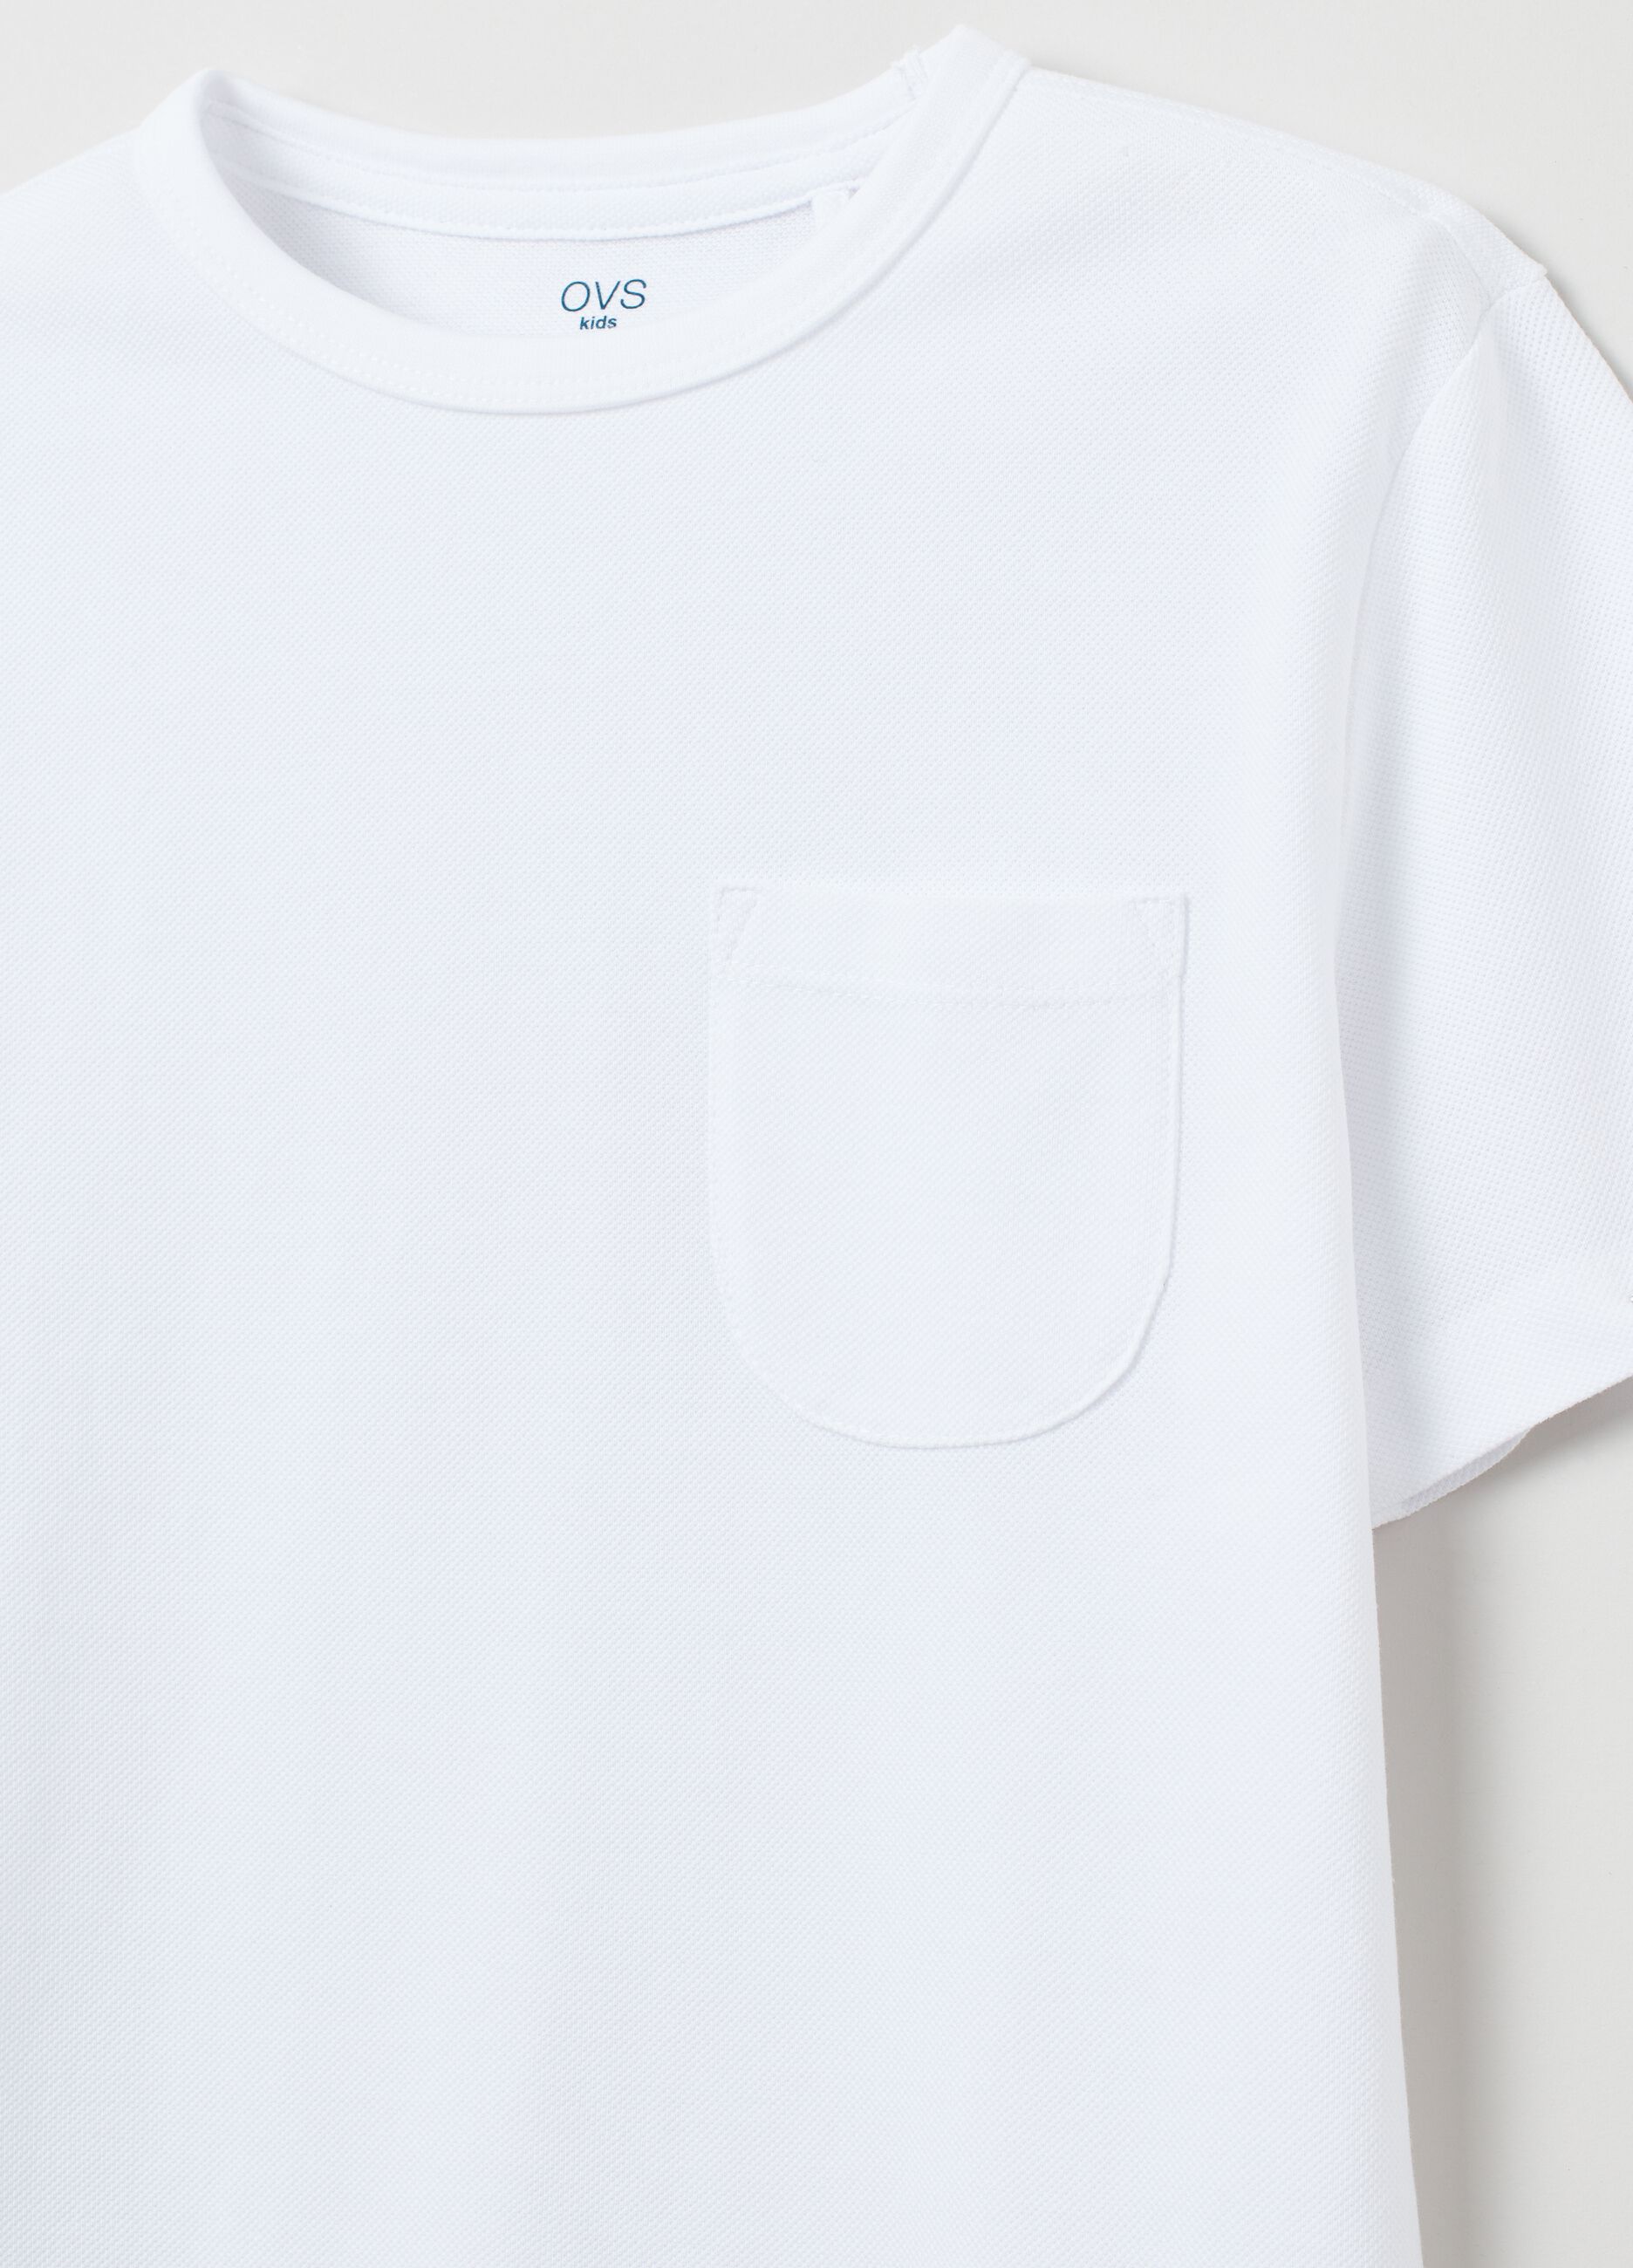 Pique T-shirt with pocket